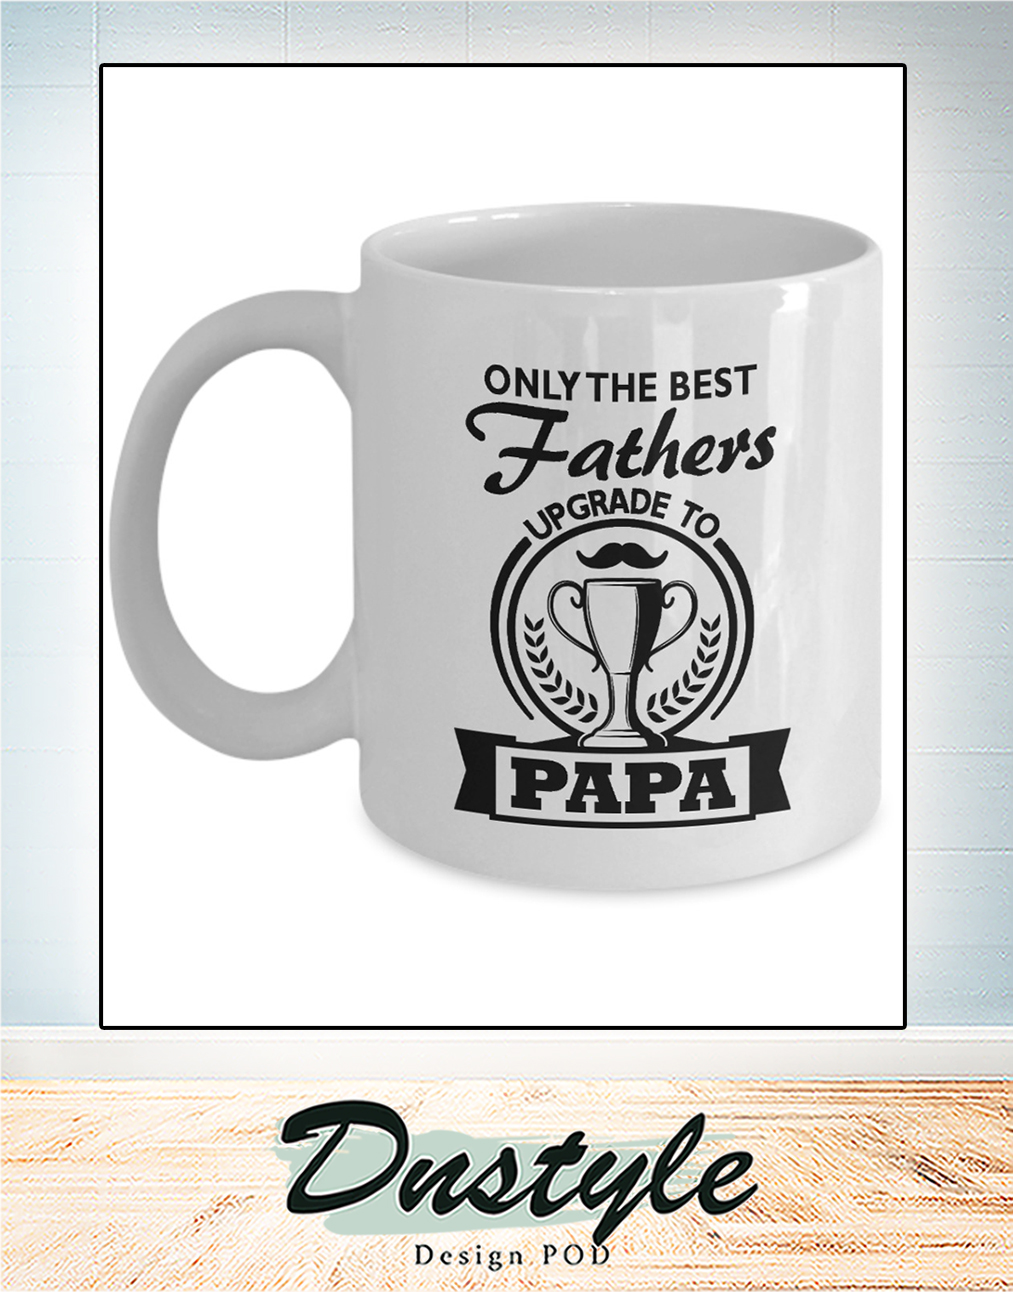 Only the best fathers upgrade to papa mug